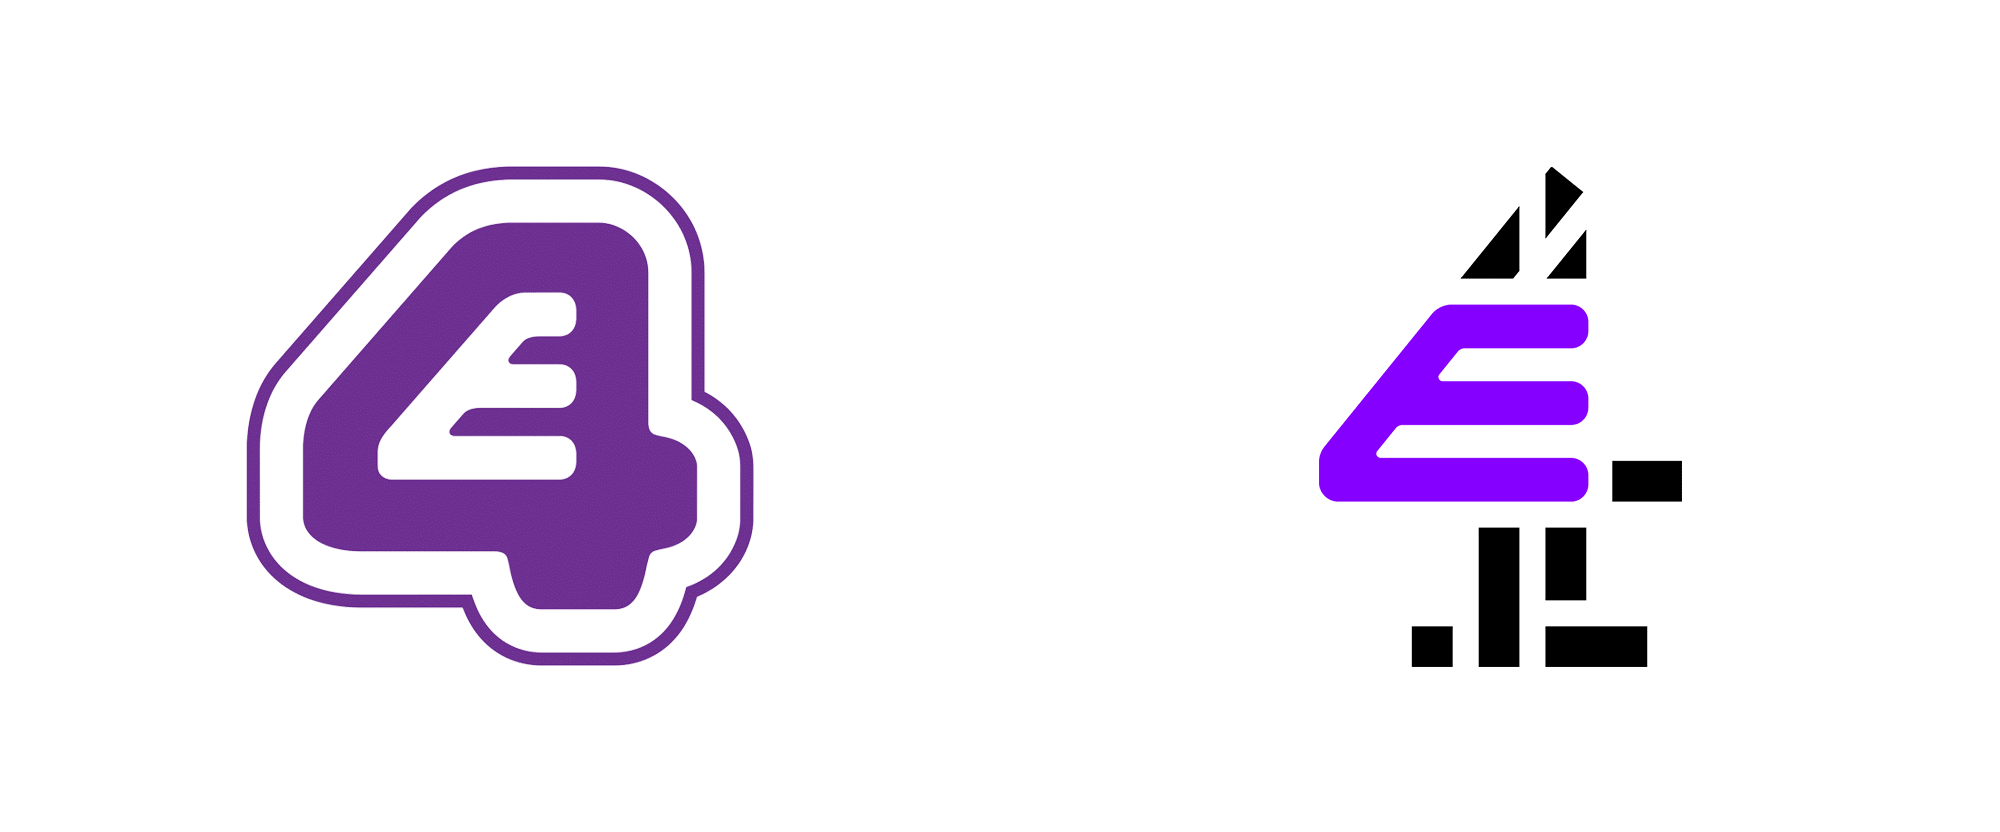 E4 Logo - Brand New: New Logos for all Channel 4 by 4creative and ManvsMachine